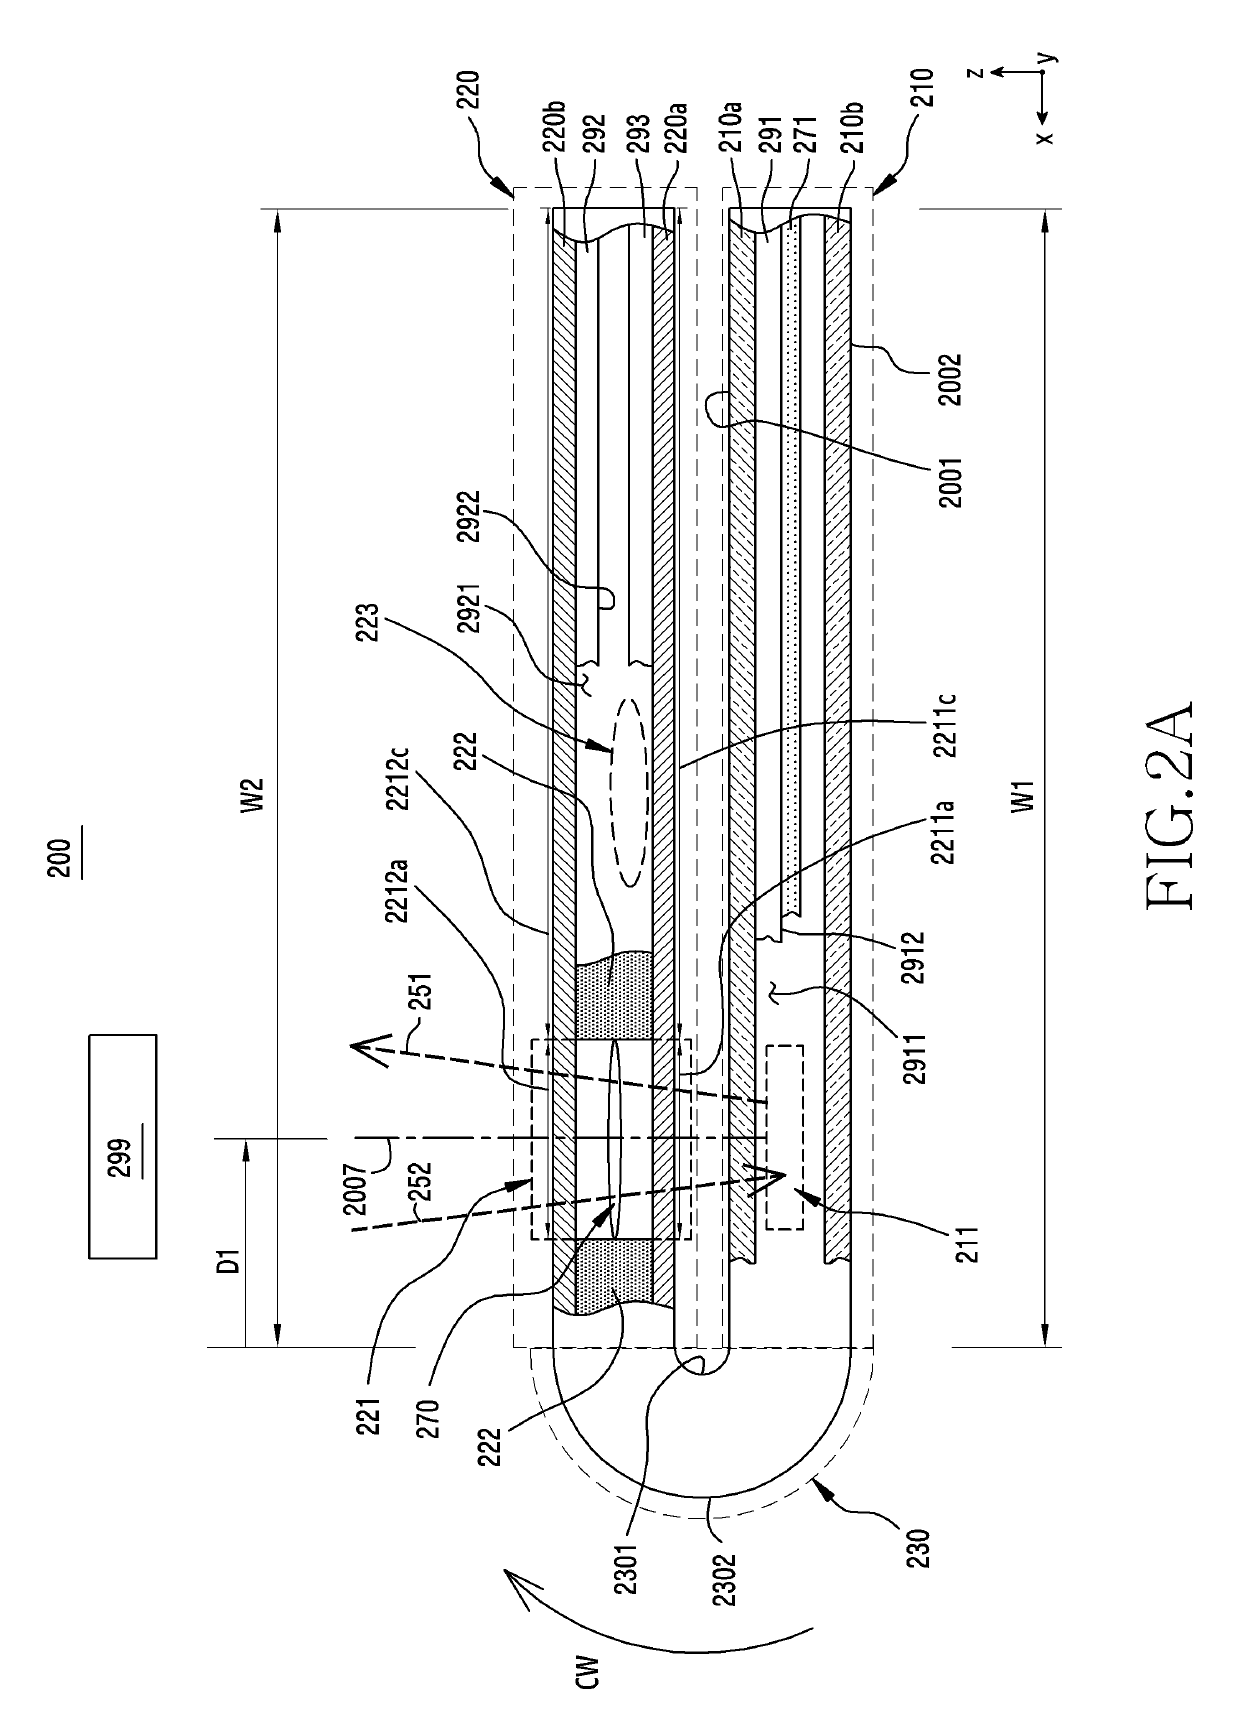 Flexible electronic device including optical sensor and method of operating same